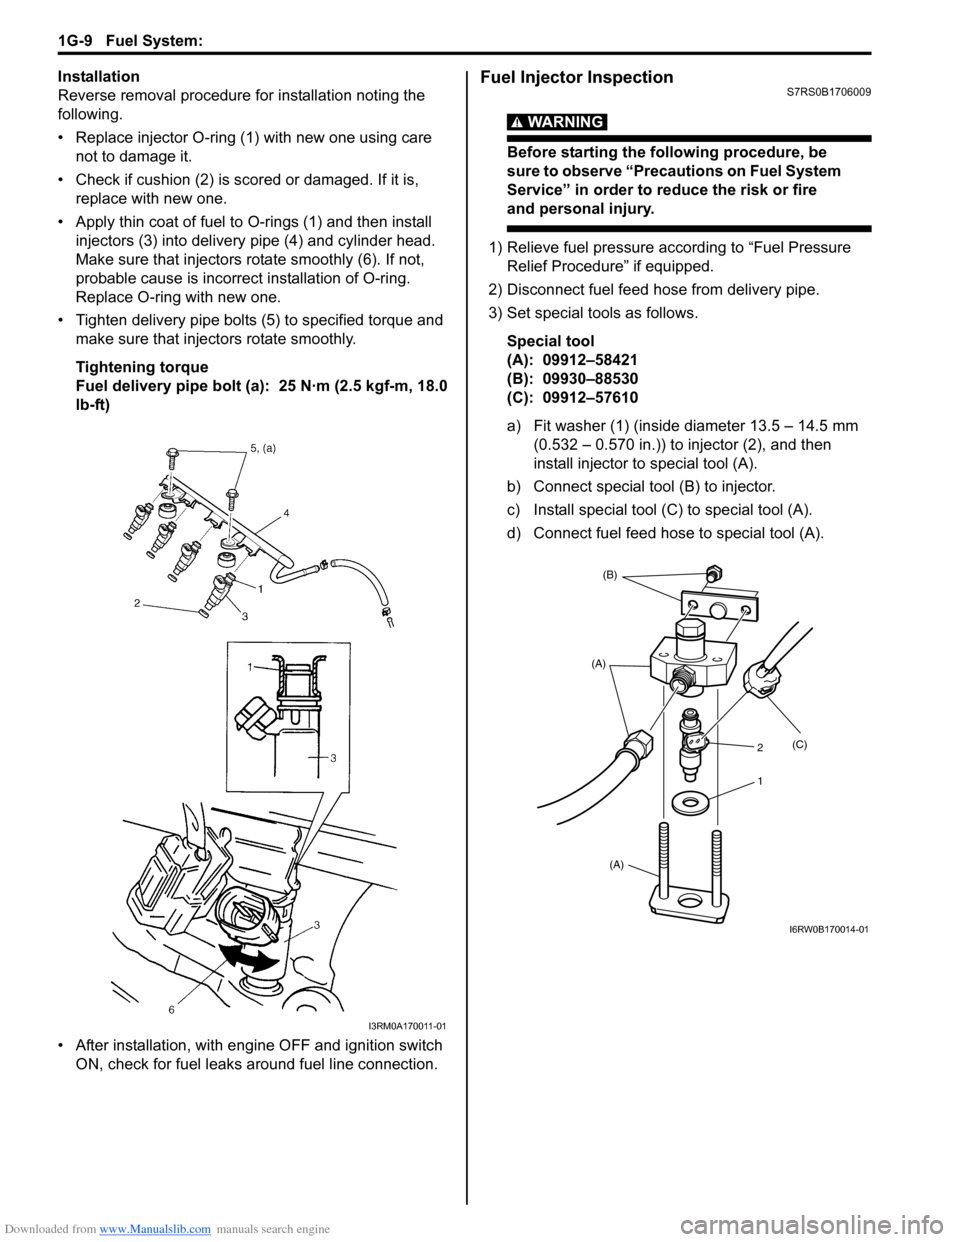 SUZUKI SWIFT 2008 2.G Service Service Manual Downloaded from www.Manualslib.com manuals search engine 1G-9 Fuel System: 
Installation
Reverse removal procedure for installation noting the 
following.
• Replace injector O-ring (1) with new one 